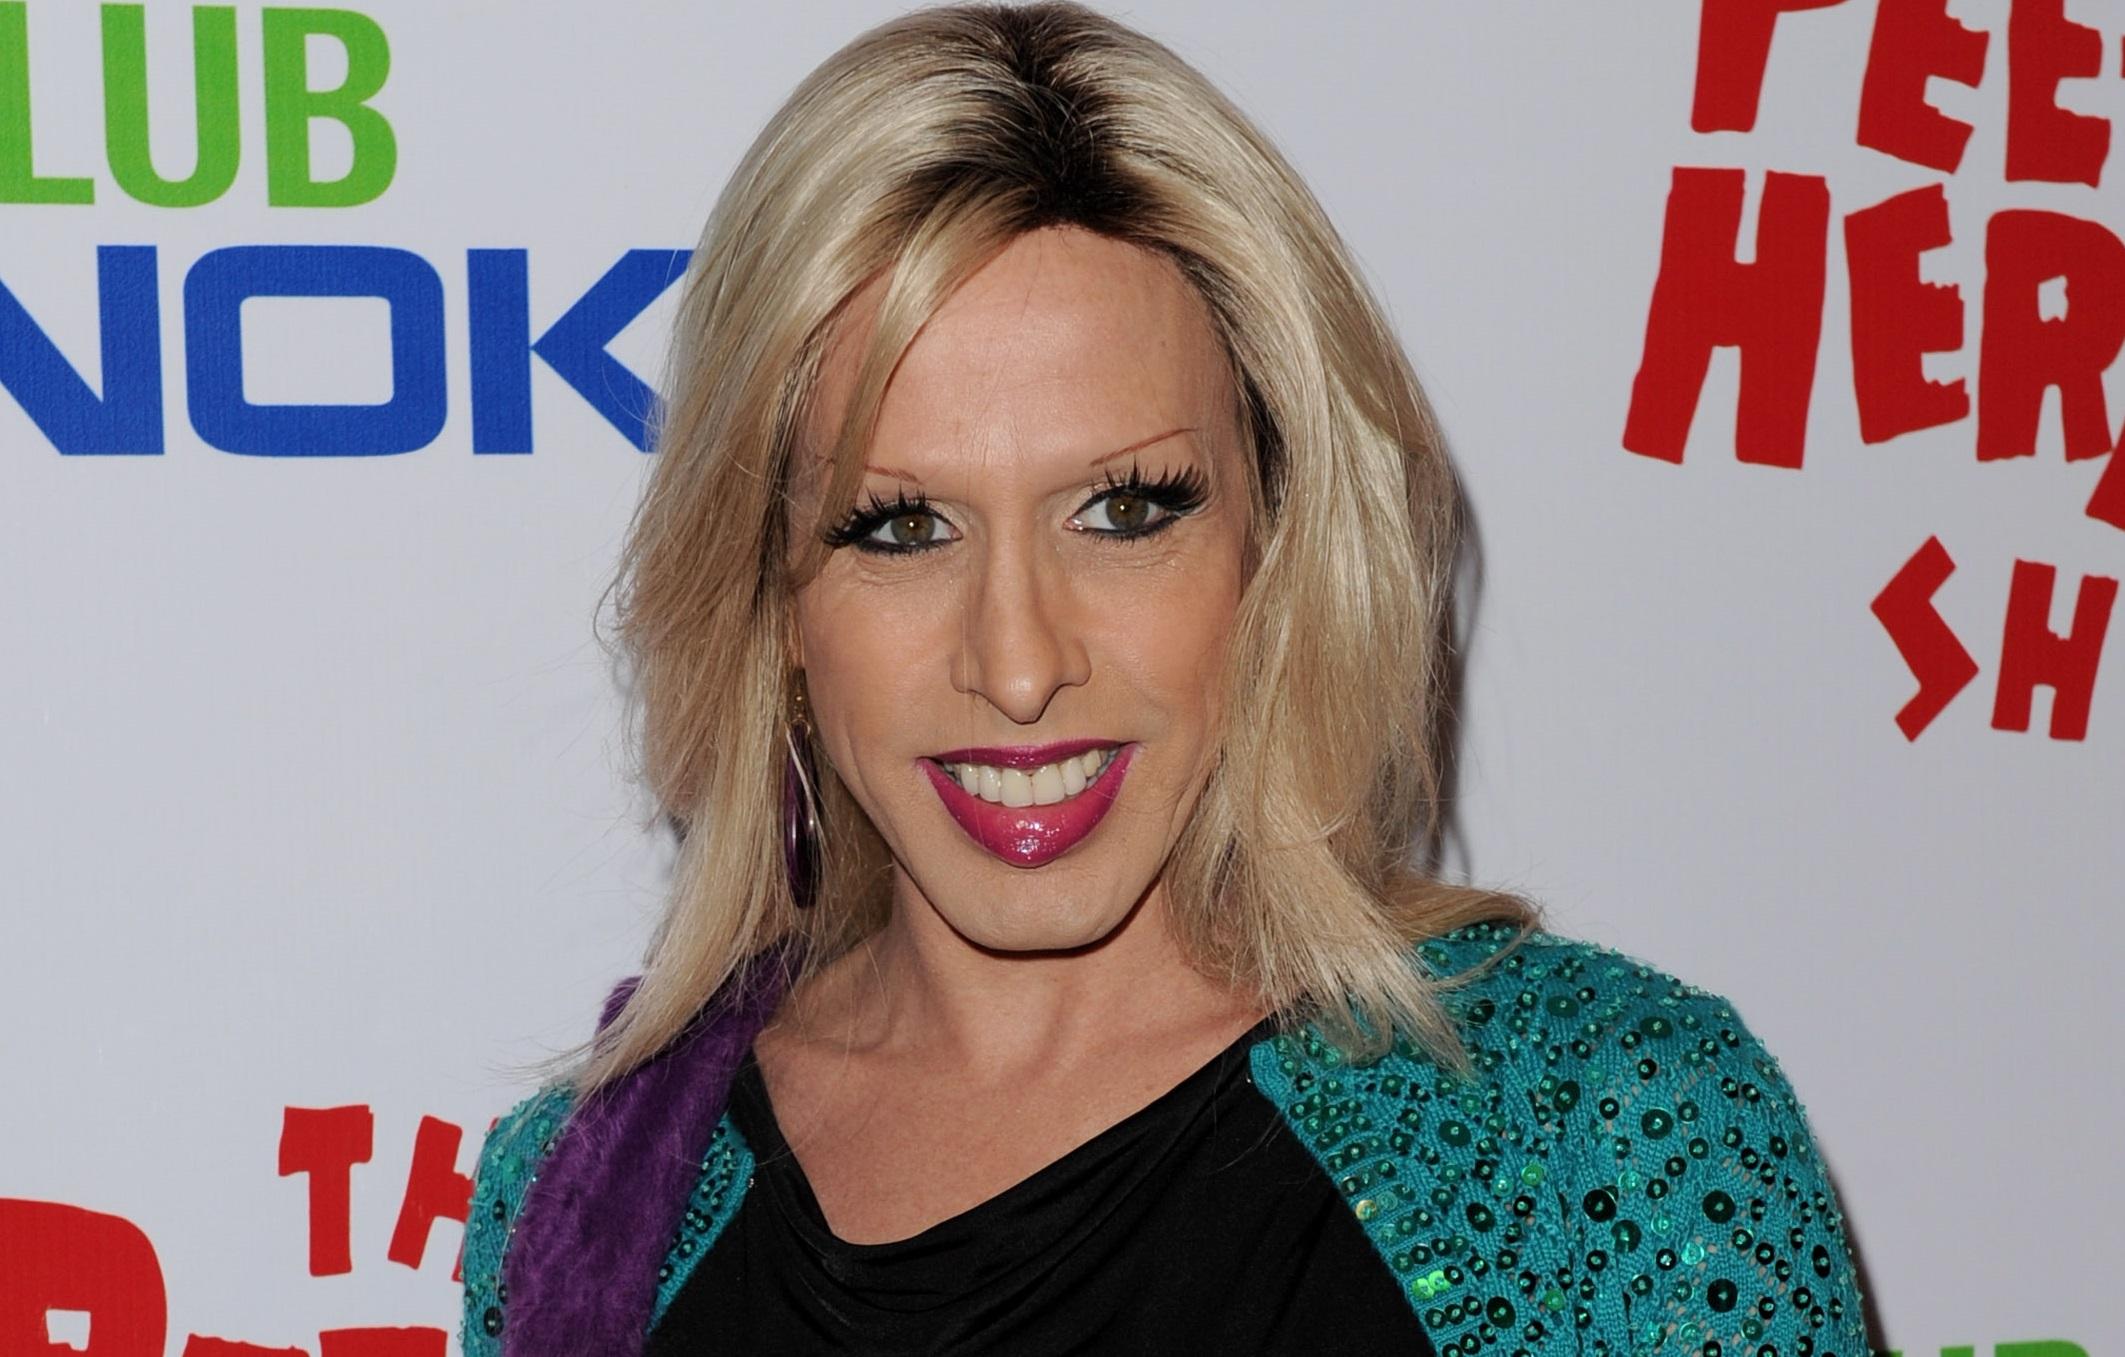 Alexis Arquette Transgender Actress And Member Of Acting Family Dies At 47 Cbs News